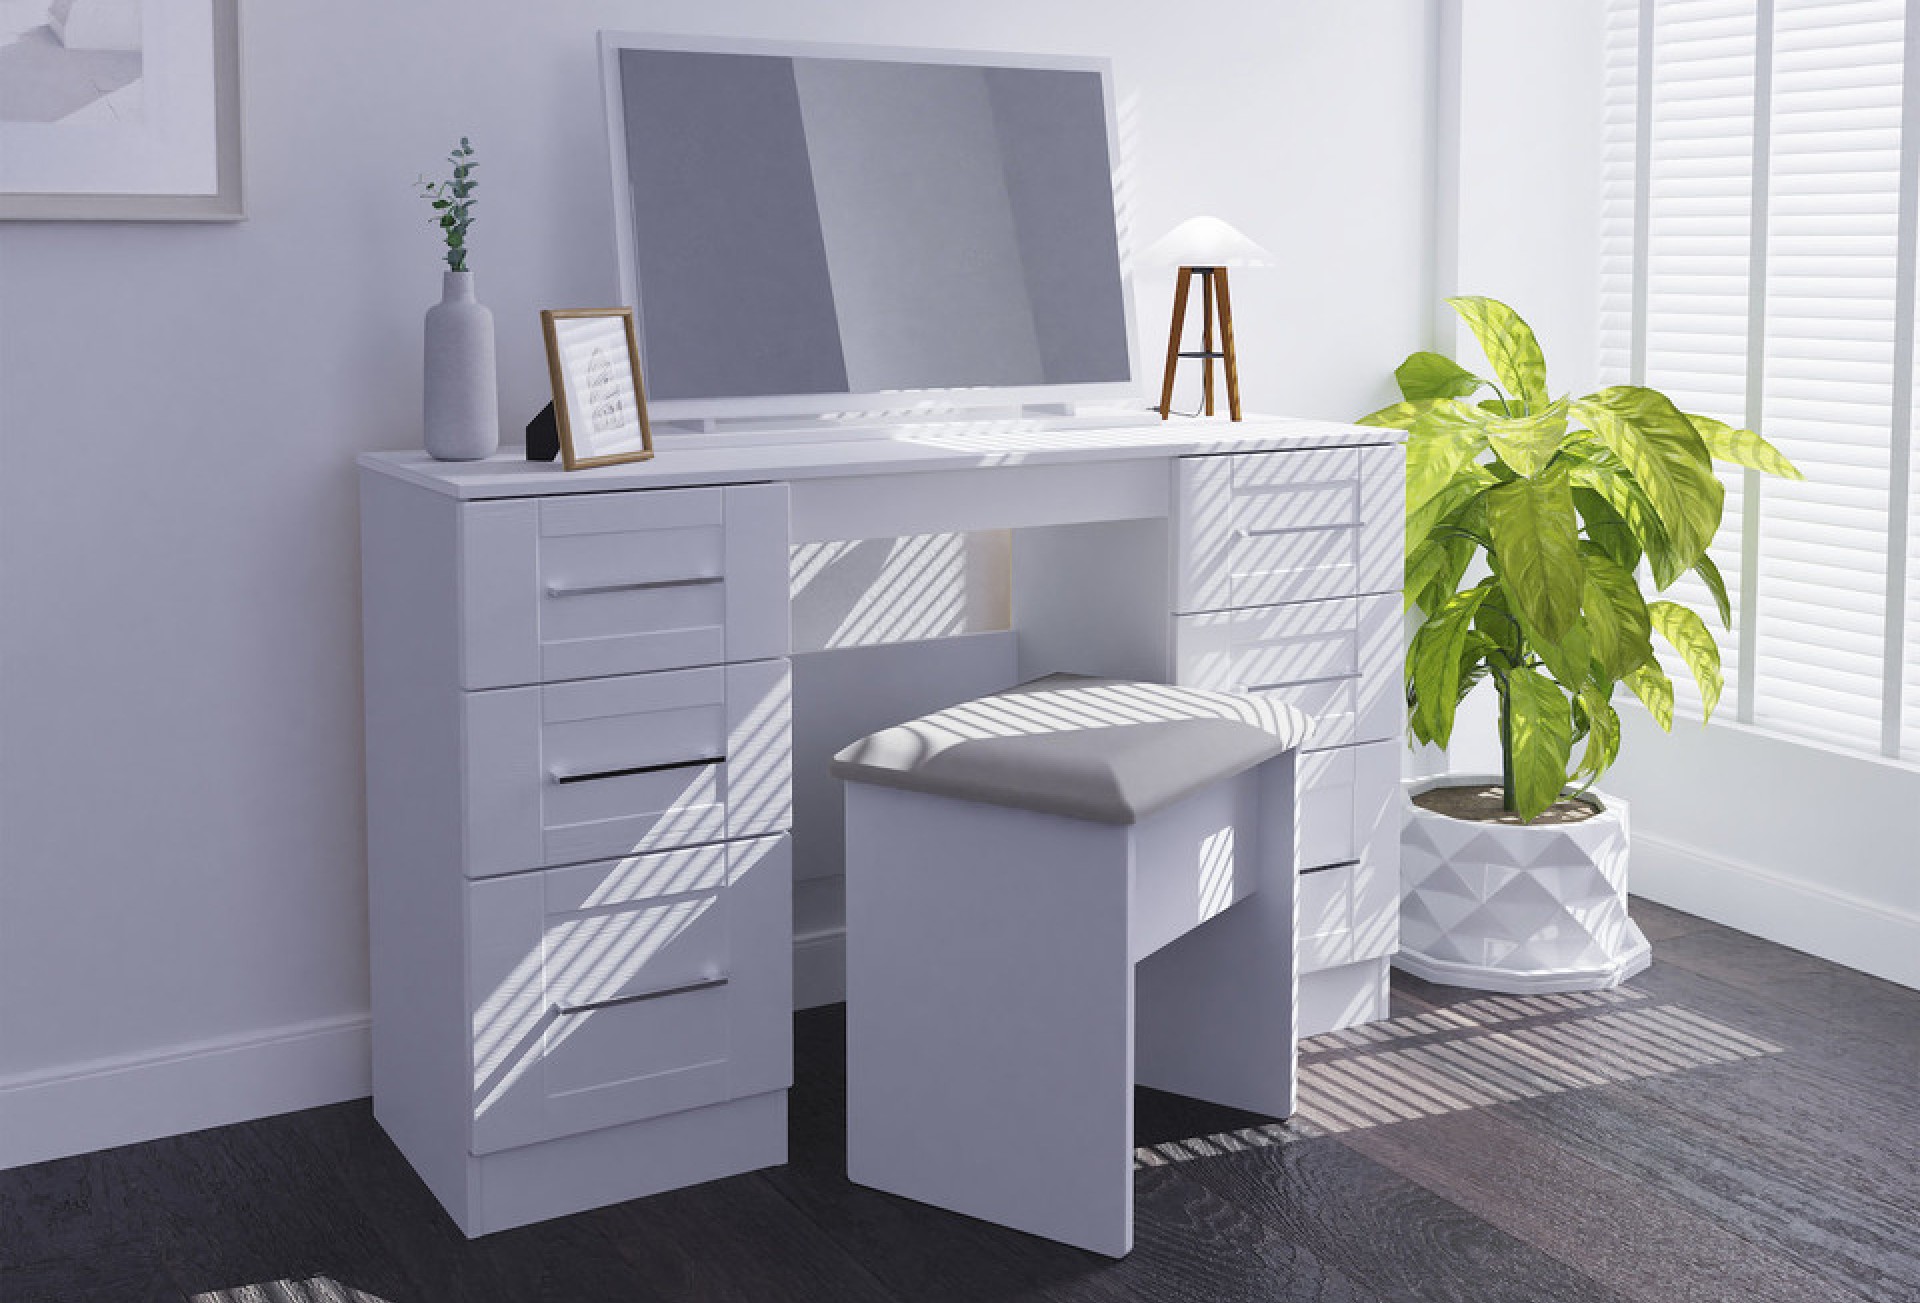 Santana white bedroom furniture lifestyle image featuring the dressing table, mirror and stool